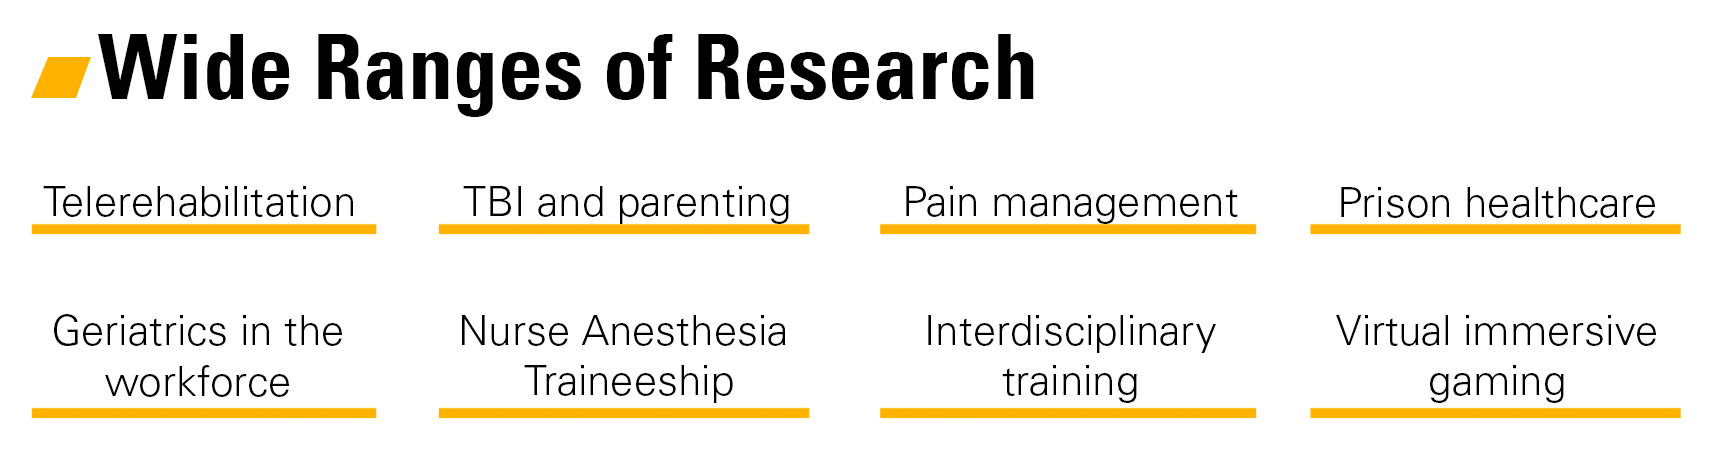 Wide Ranges of Research - Telerehabilitation, TBI and parenting, pain management, prison healthcare, geriatrics in the workforce, nurse anesthesia traineeship, interdisciplinary training, virtual immersive gaming